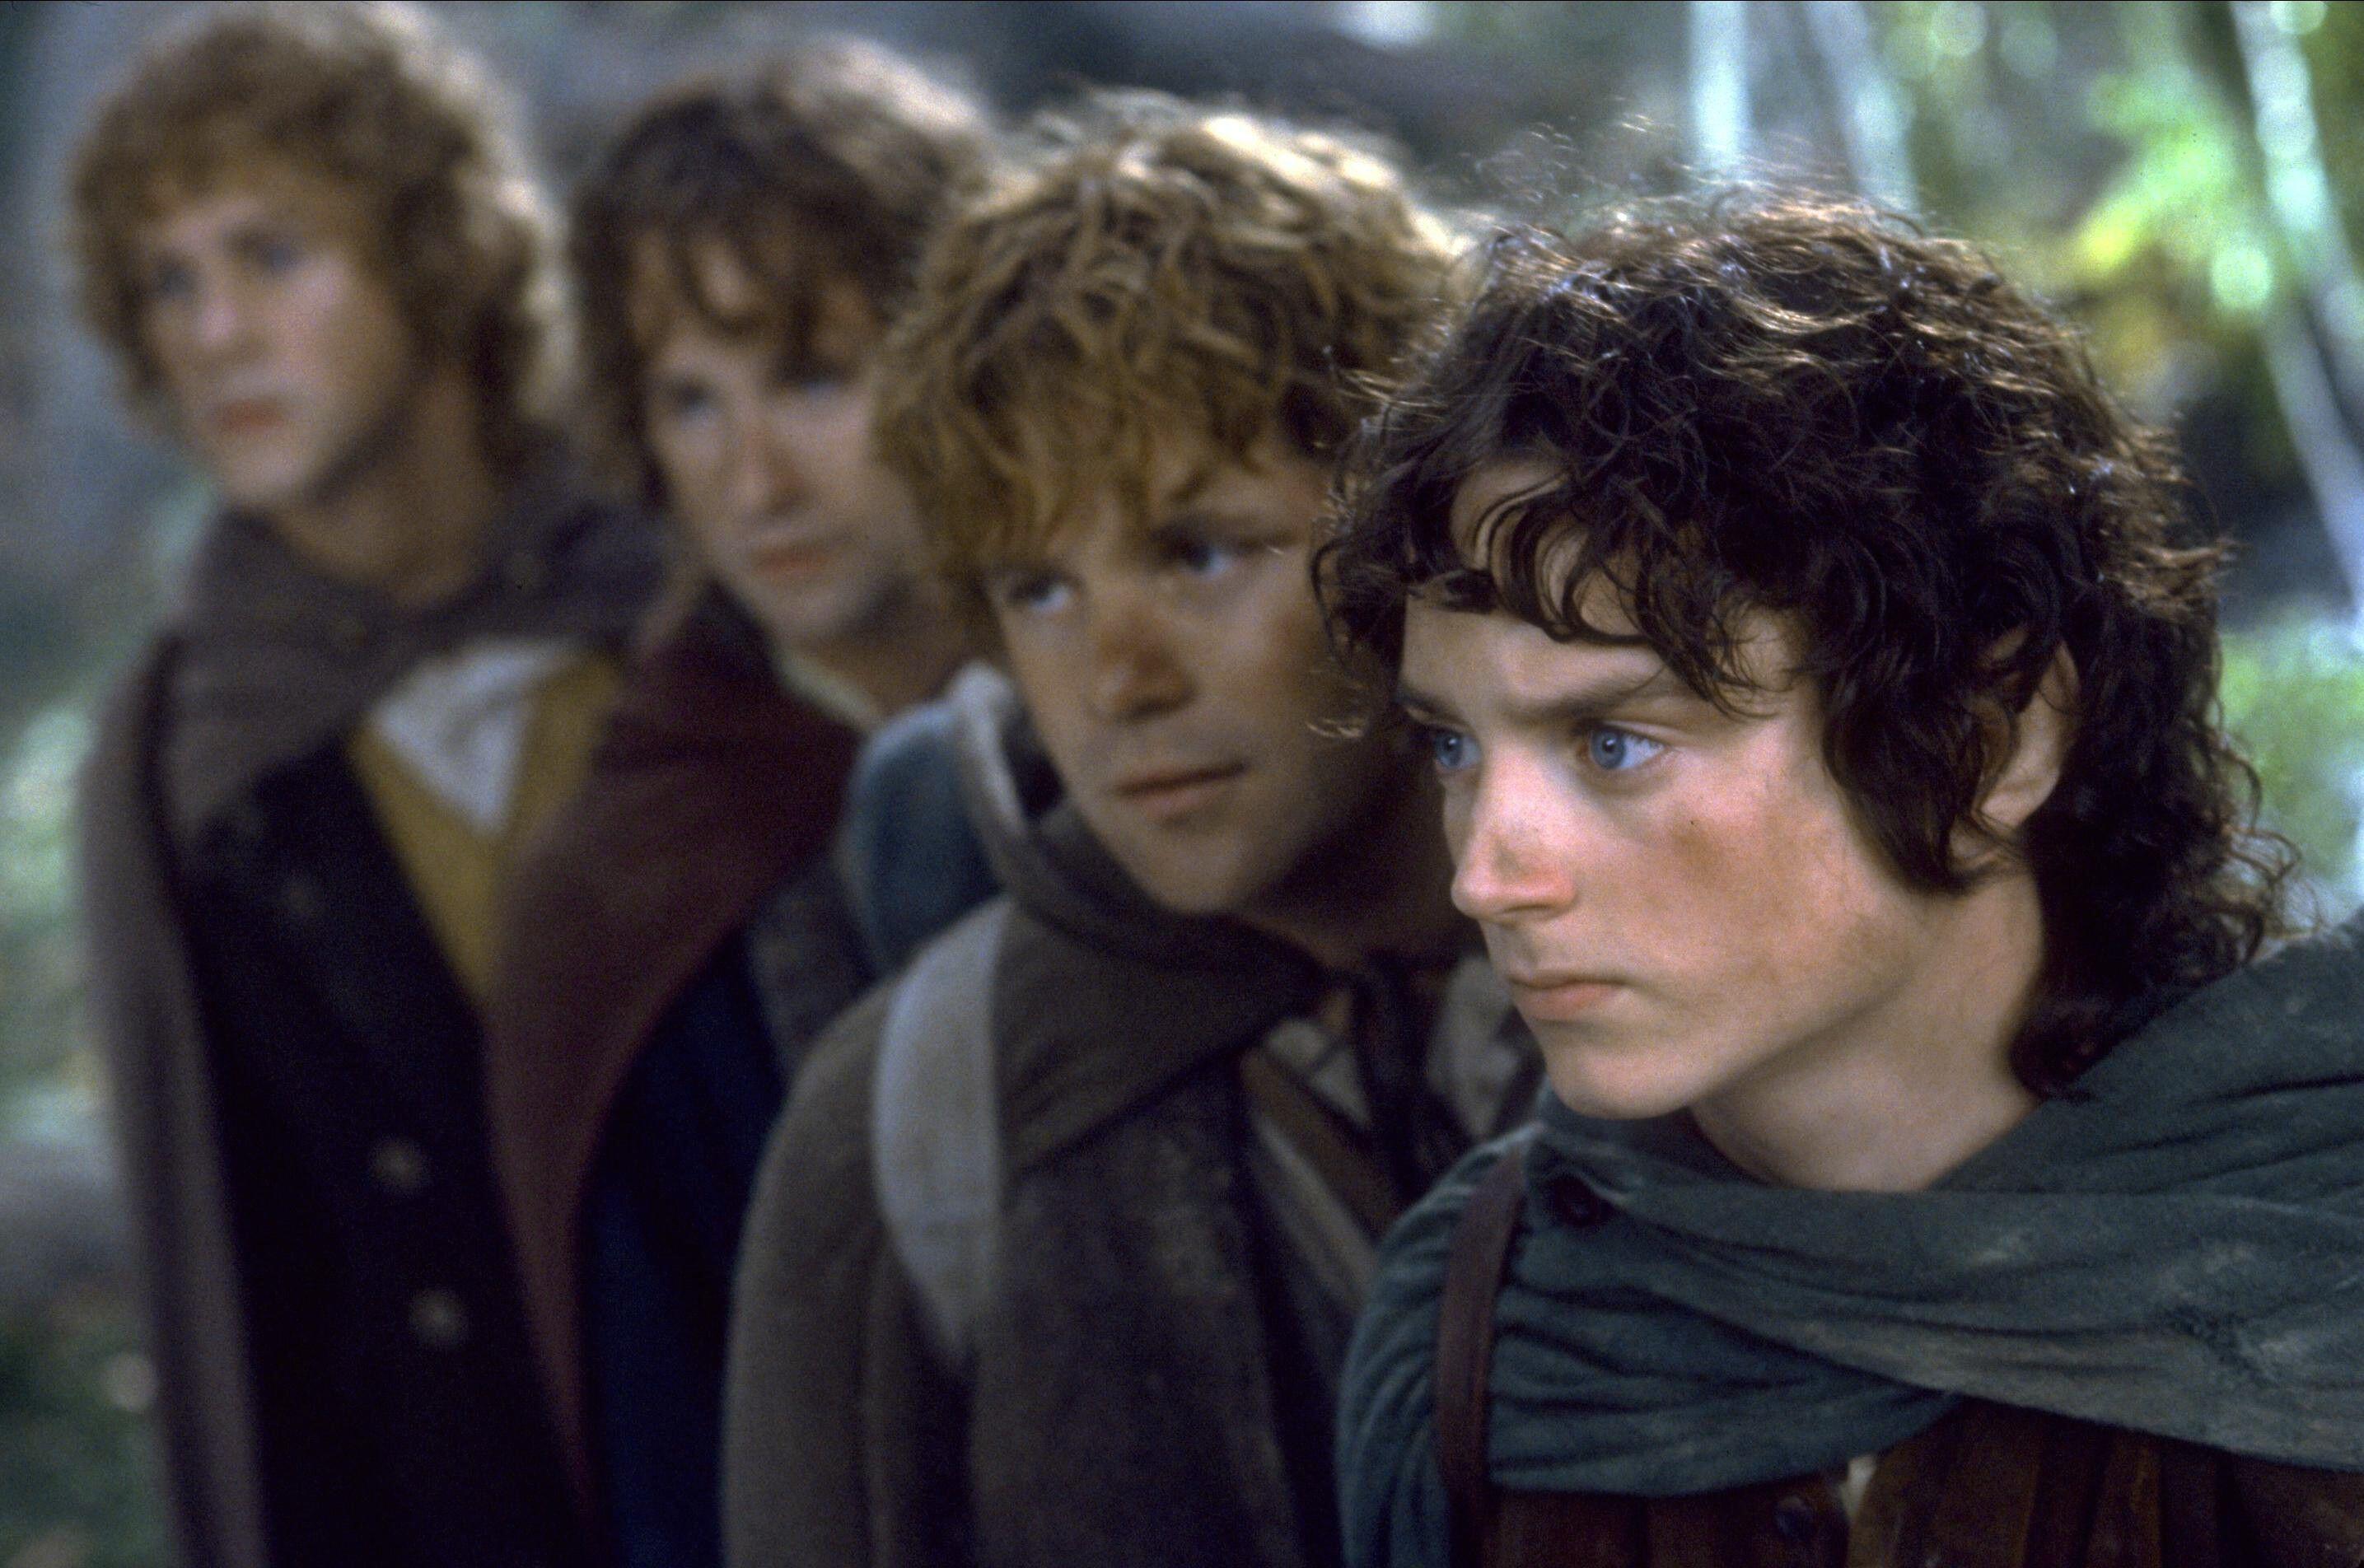 THE LORD OF THE RINGS: RINGS OF POWER Season 2 Manages to Wrap